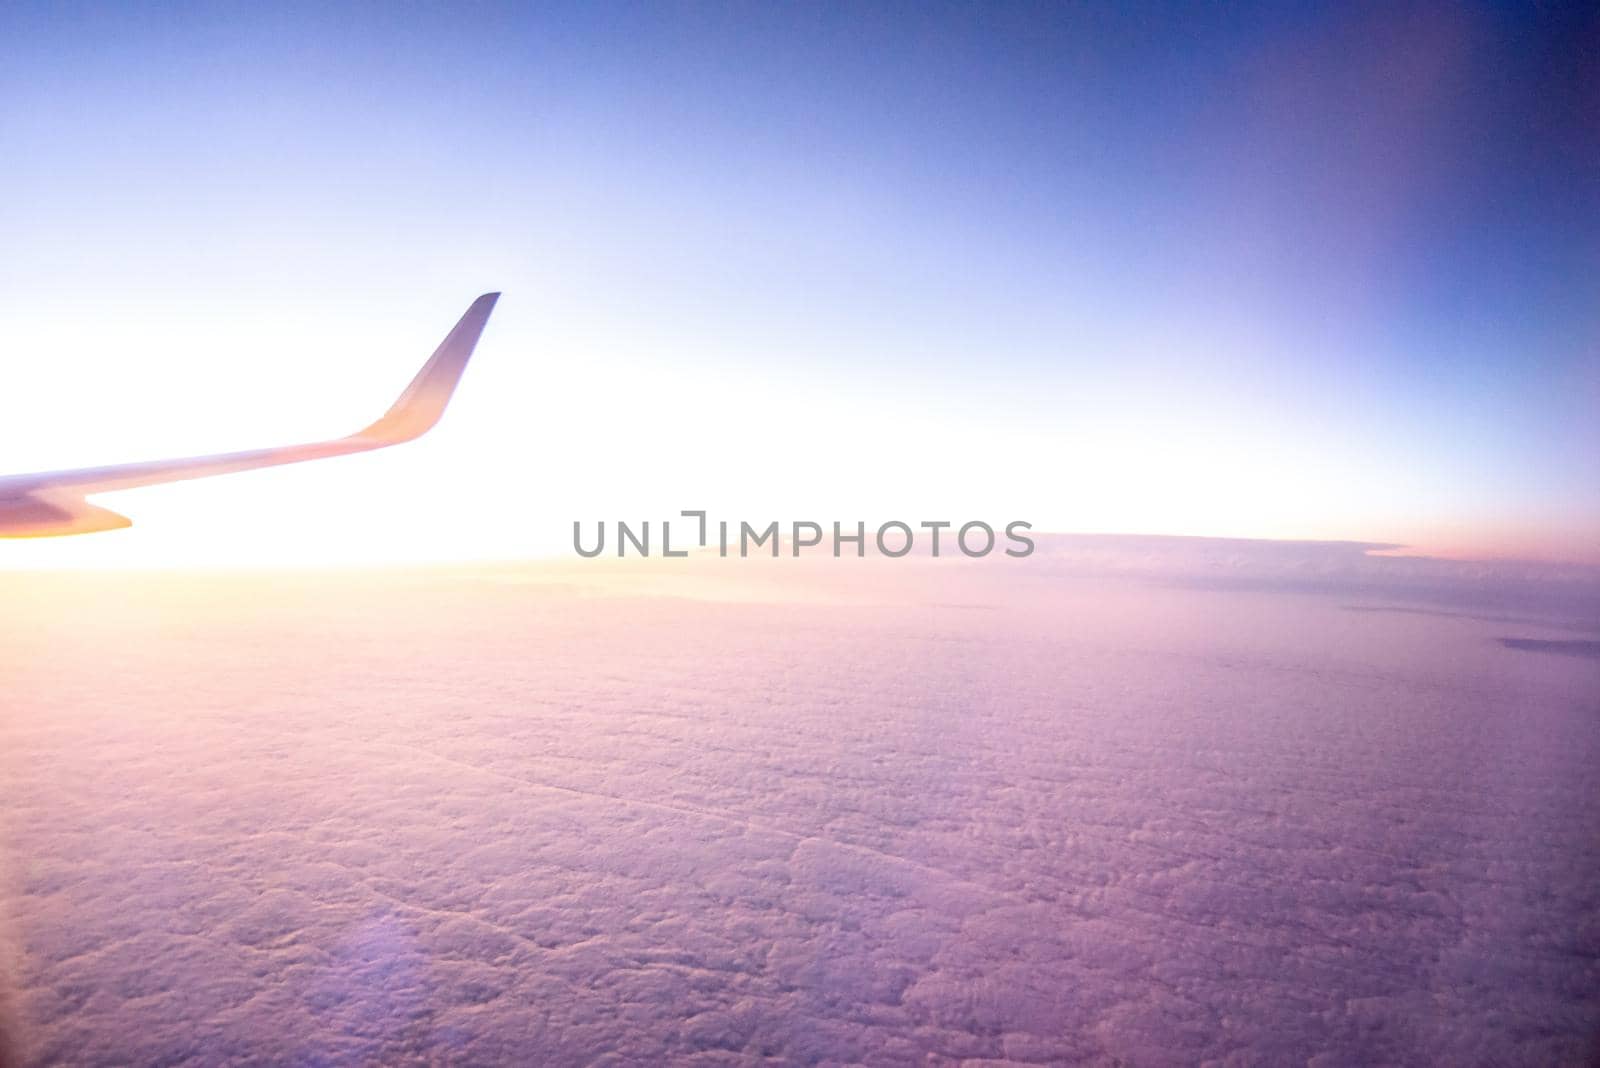 View from the plane on a beautiful orange sunset by digidreamgrafix